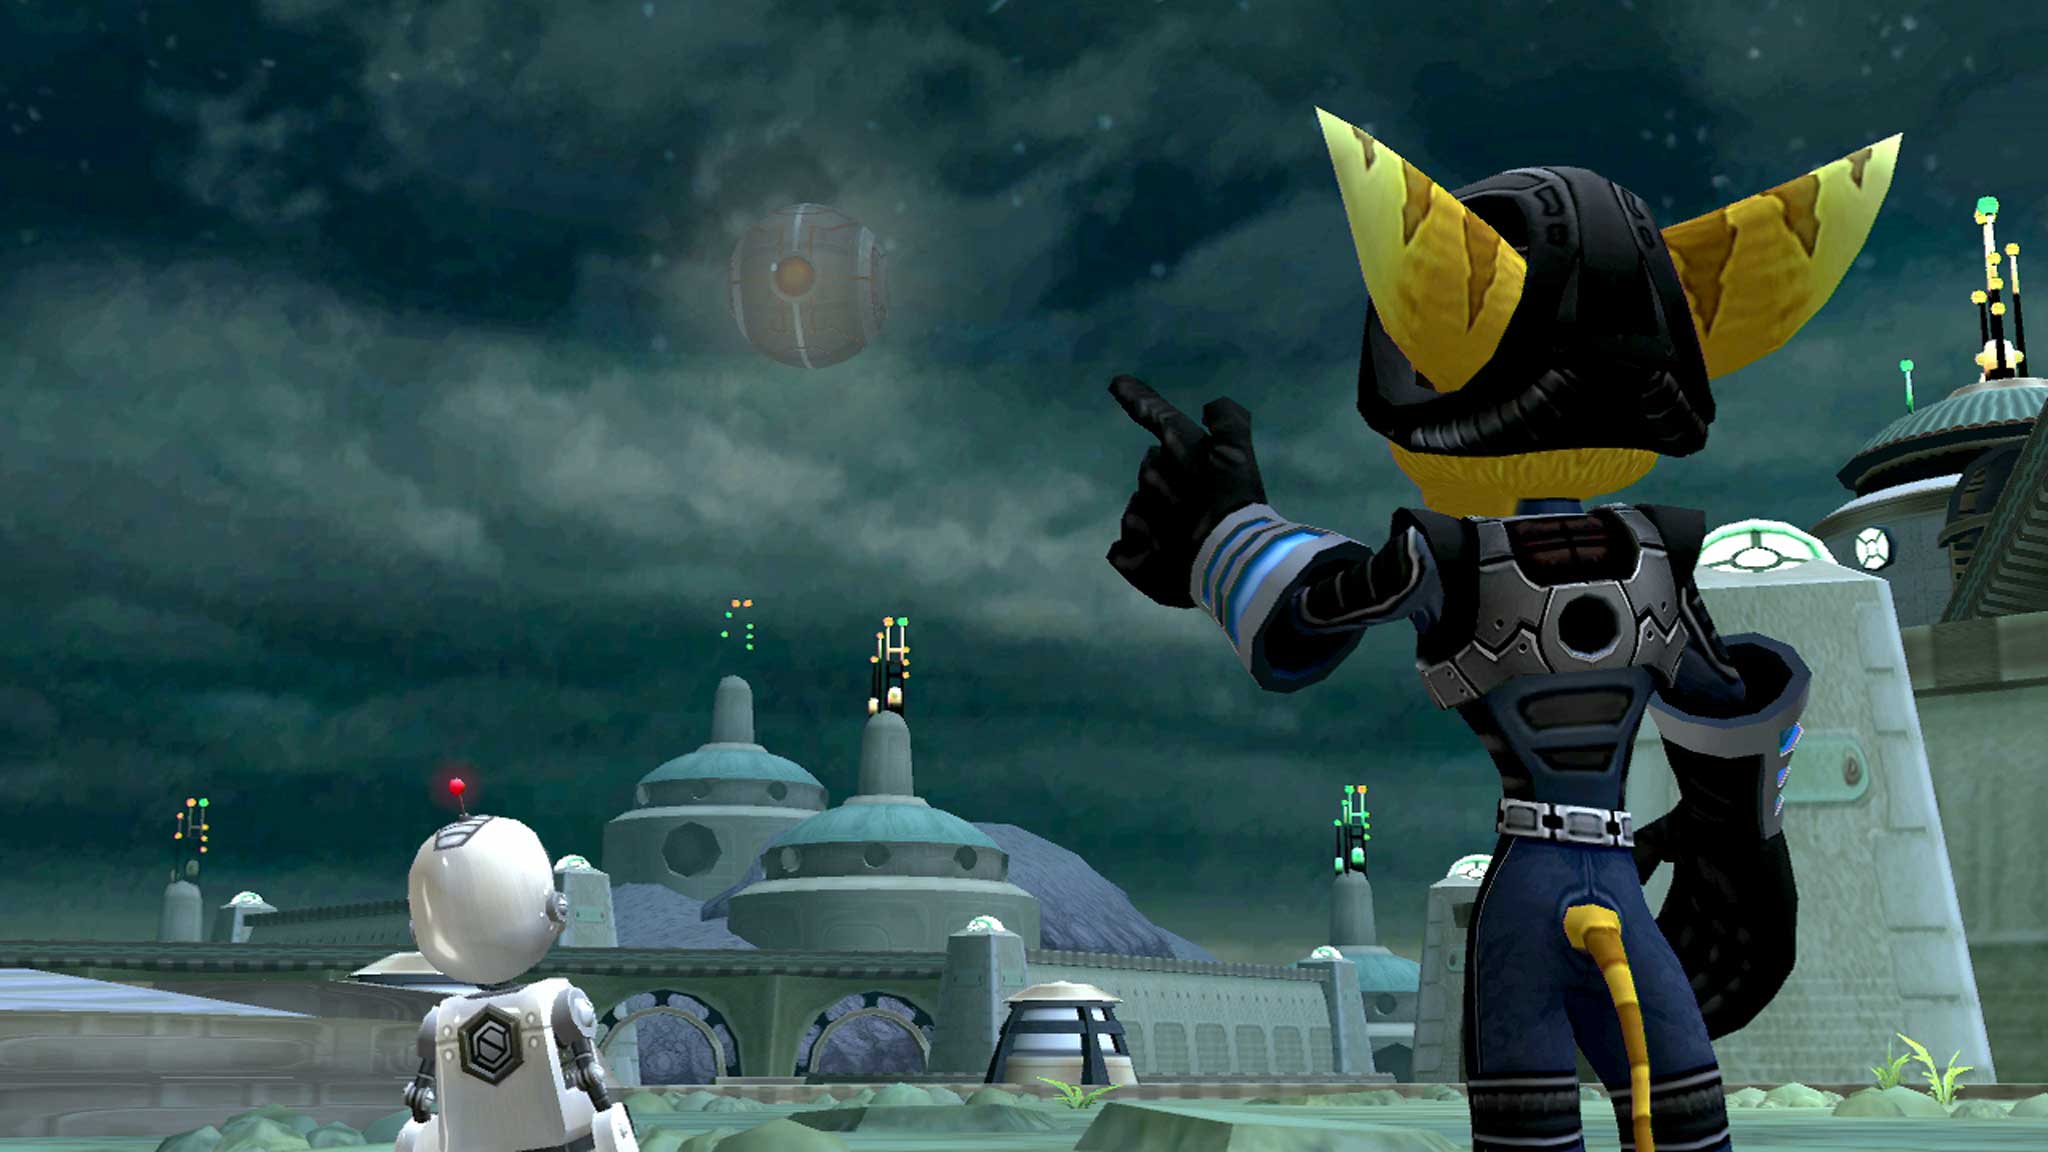 Ratchet and Clank Trilogy: warm nostalgia for fans - or a treat for newcomers to the series